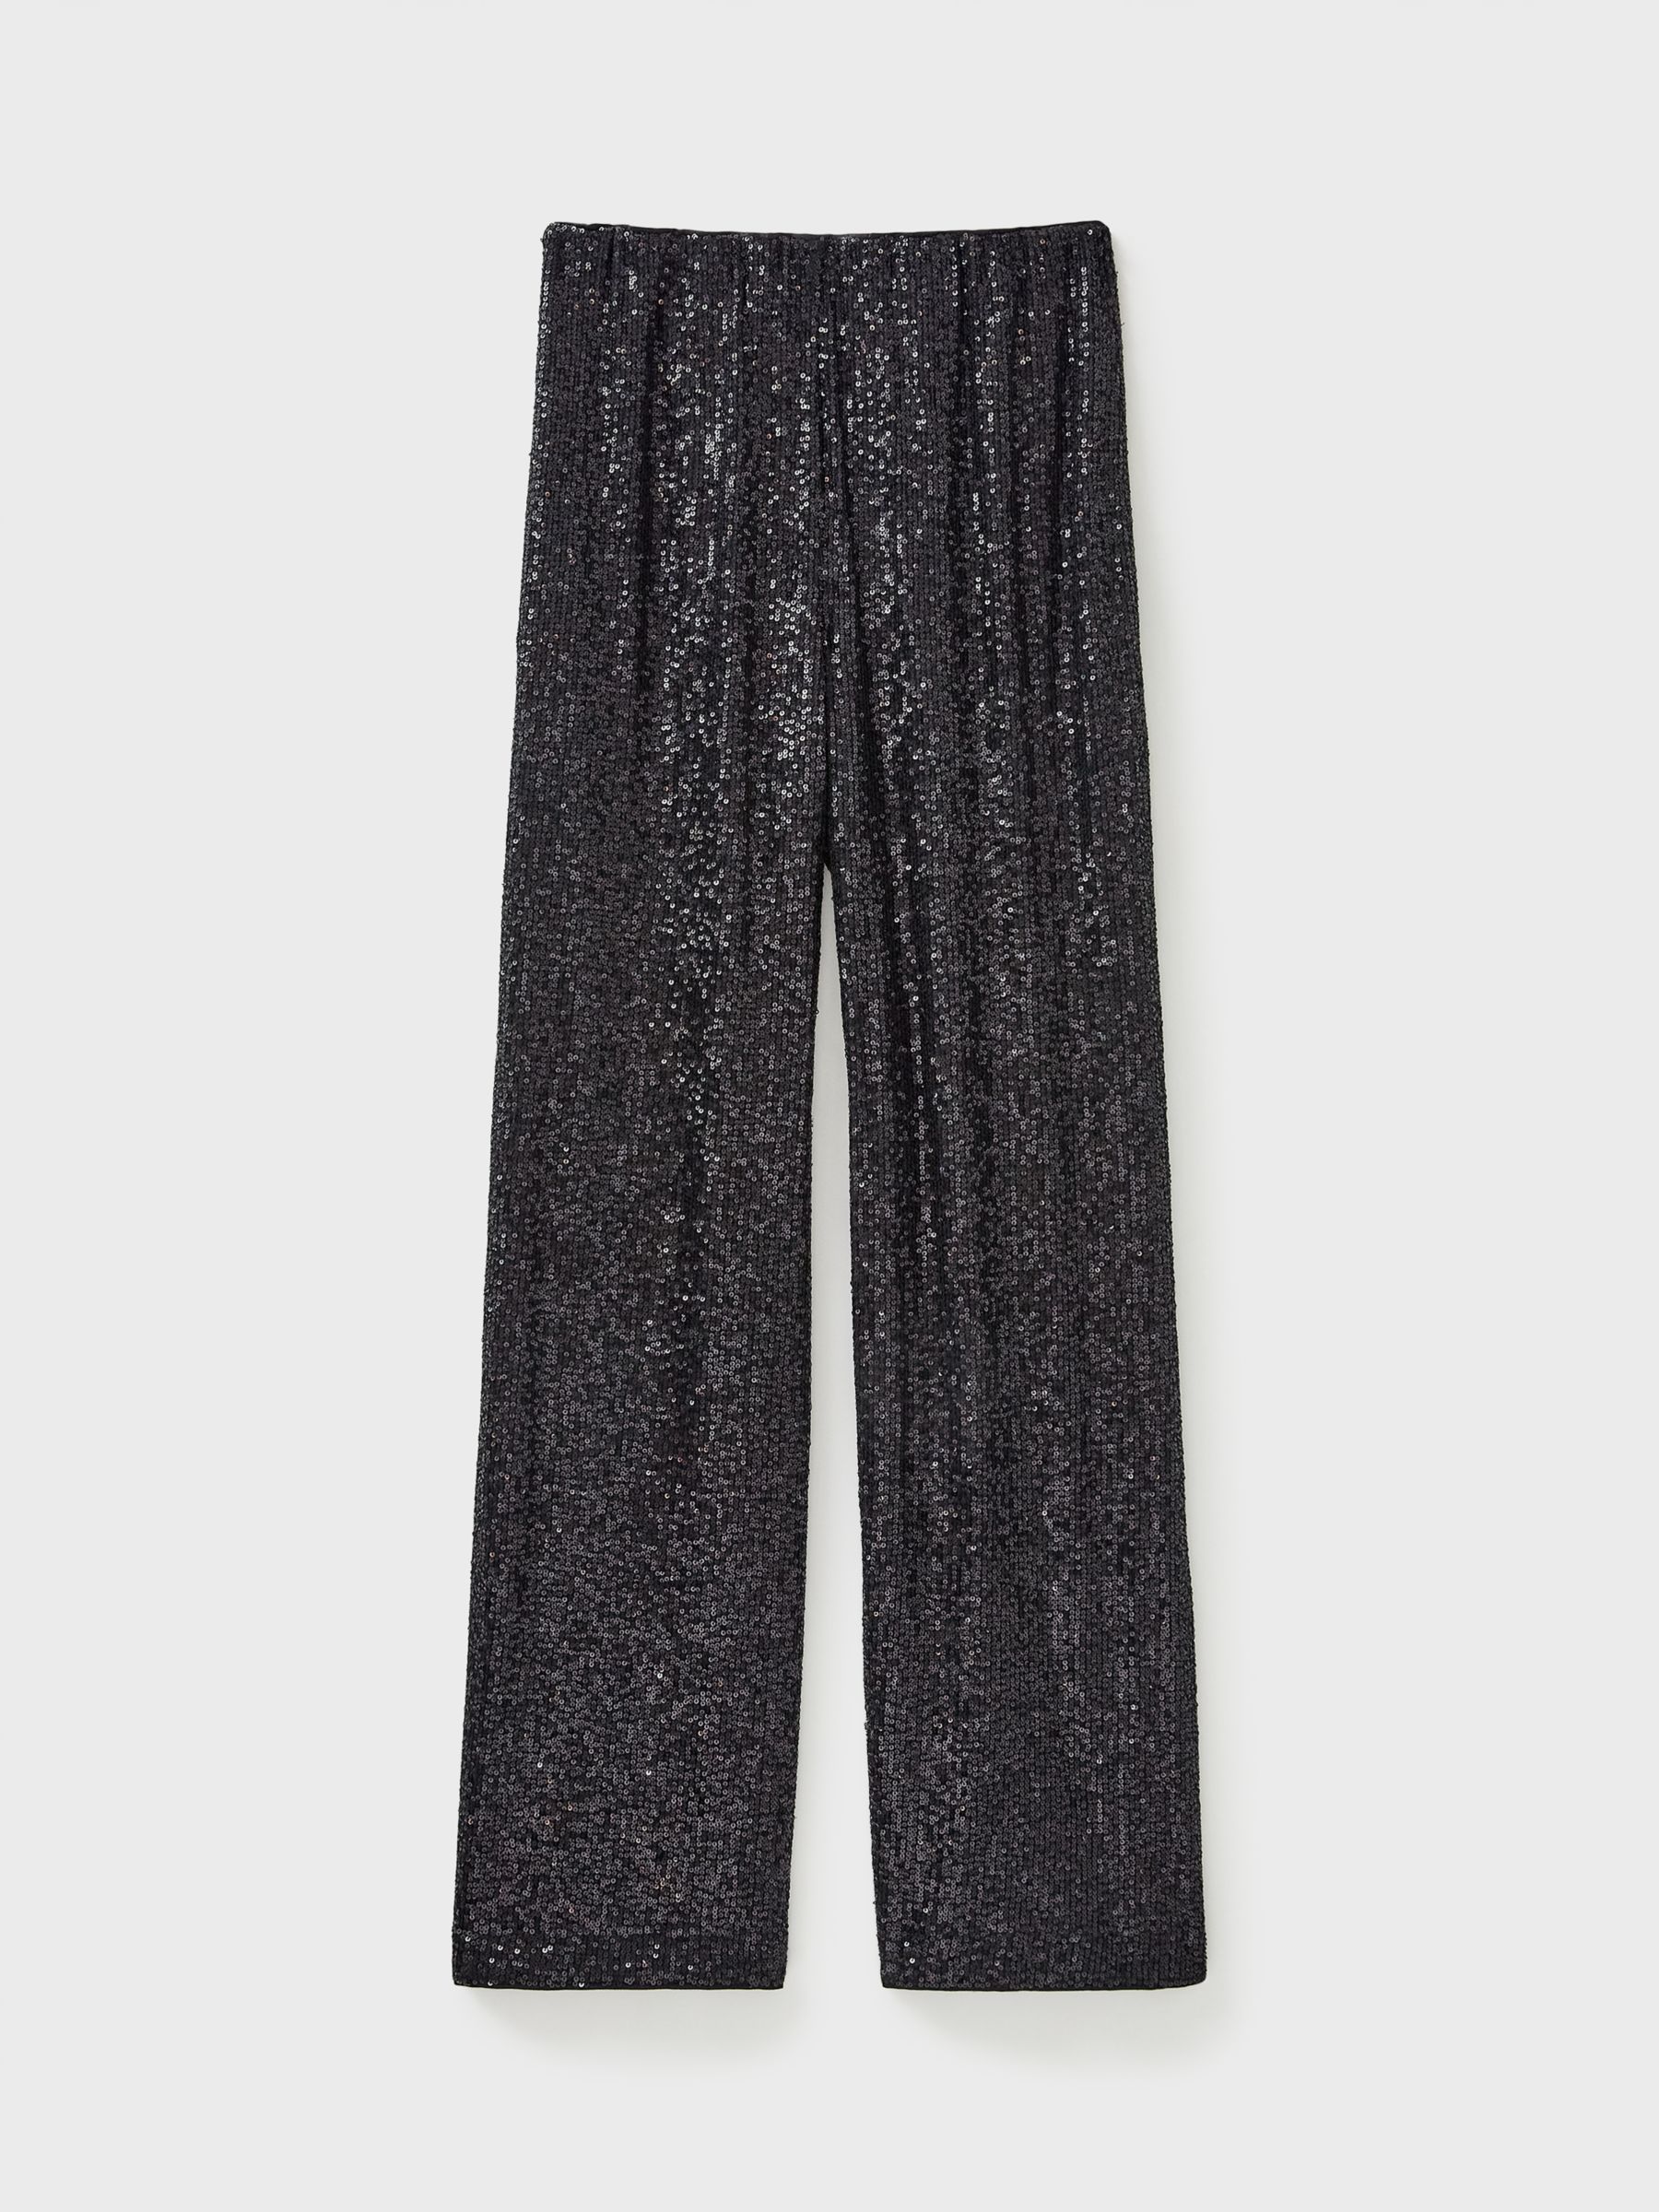 Buy Crew Clothing Eve Sequin Wide Leg Trousers, Black Online at johnlewis.com